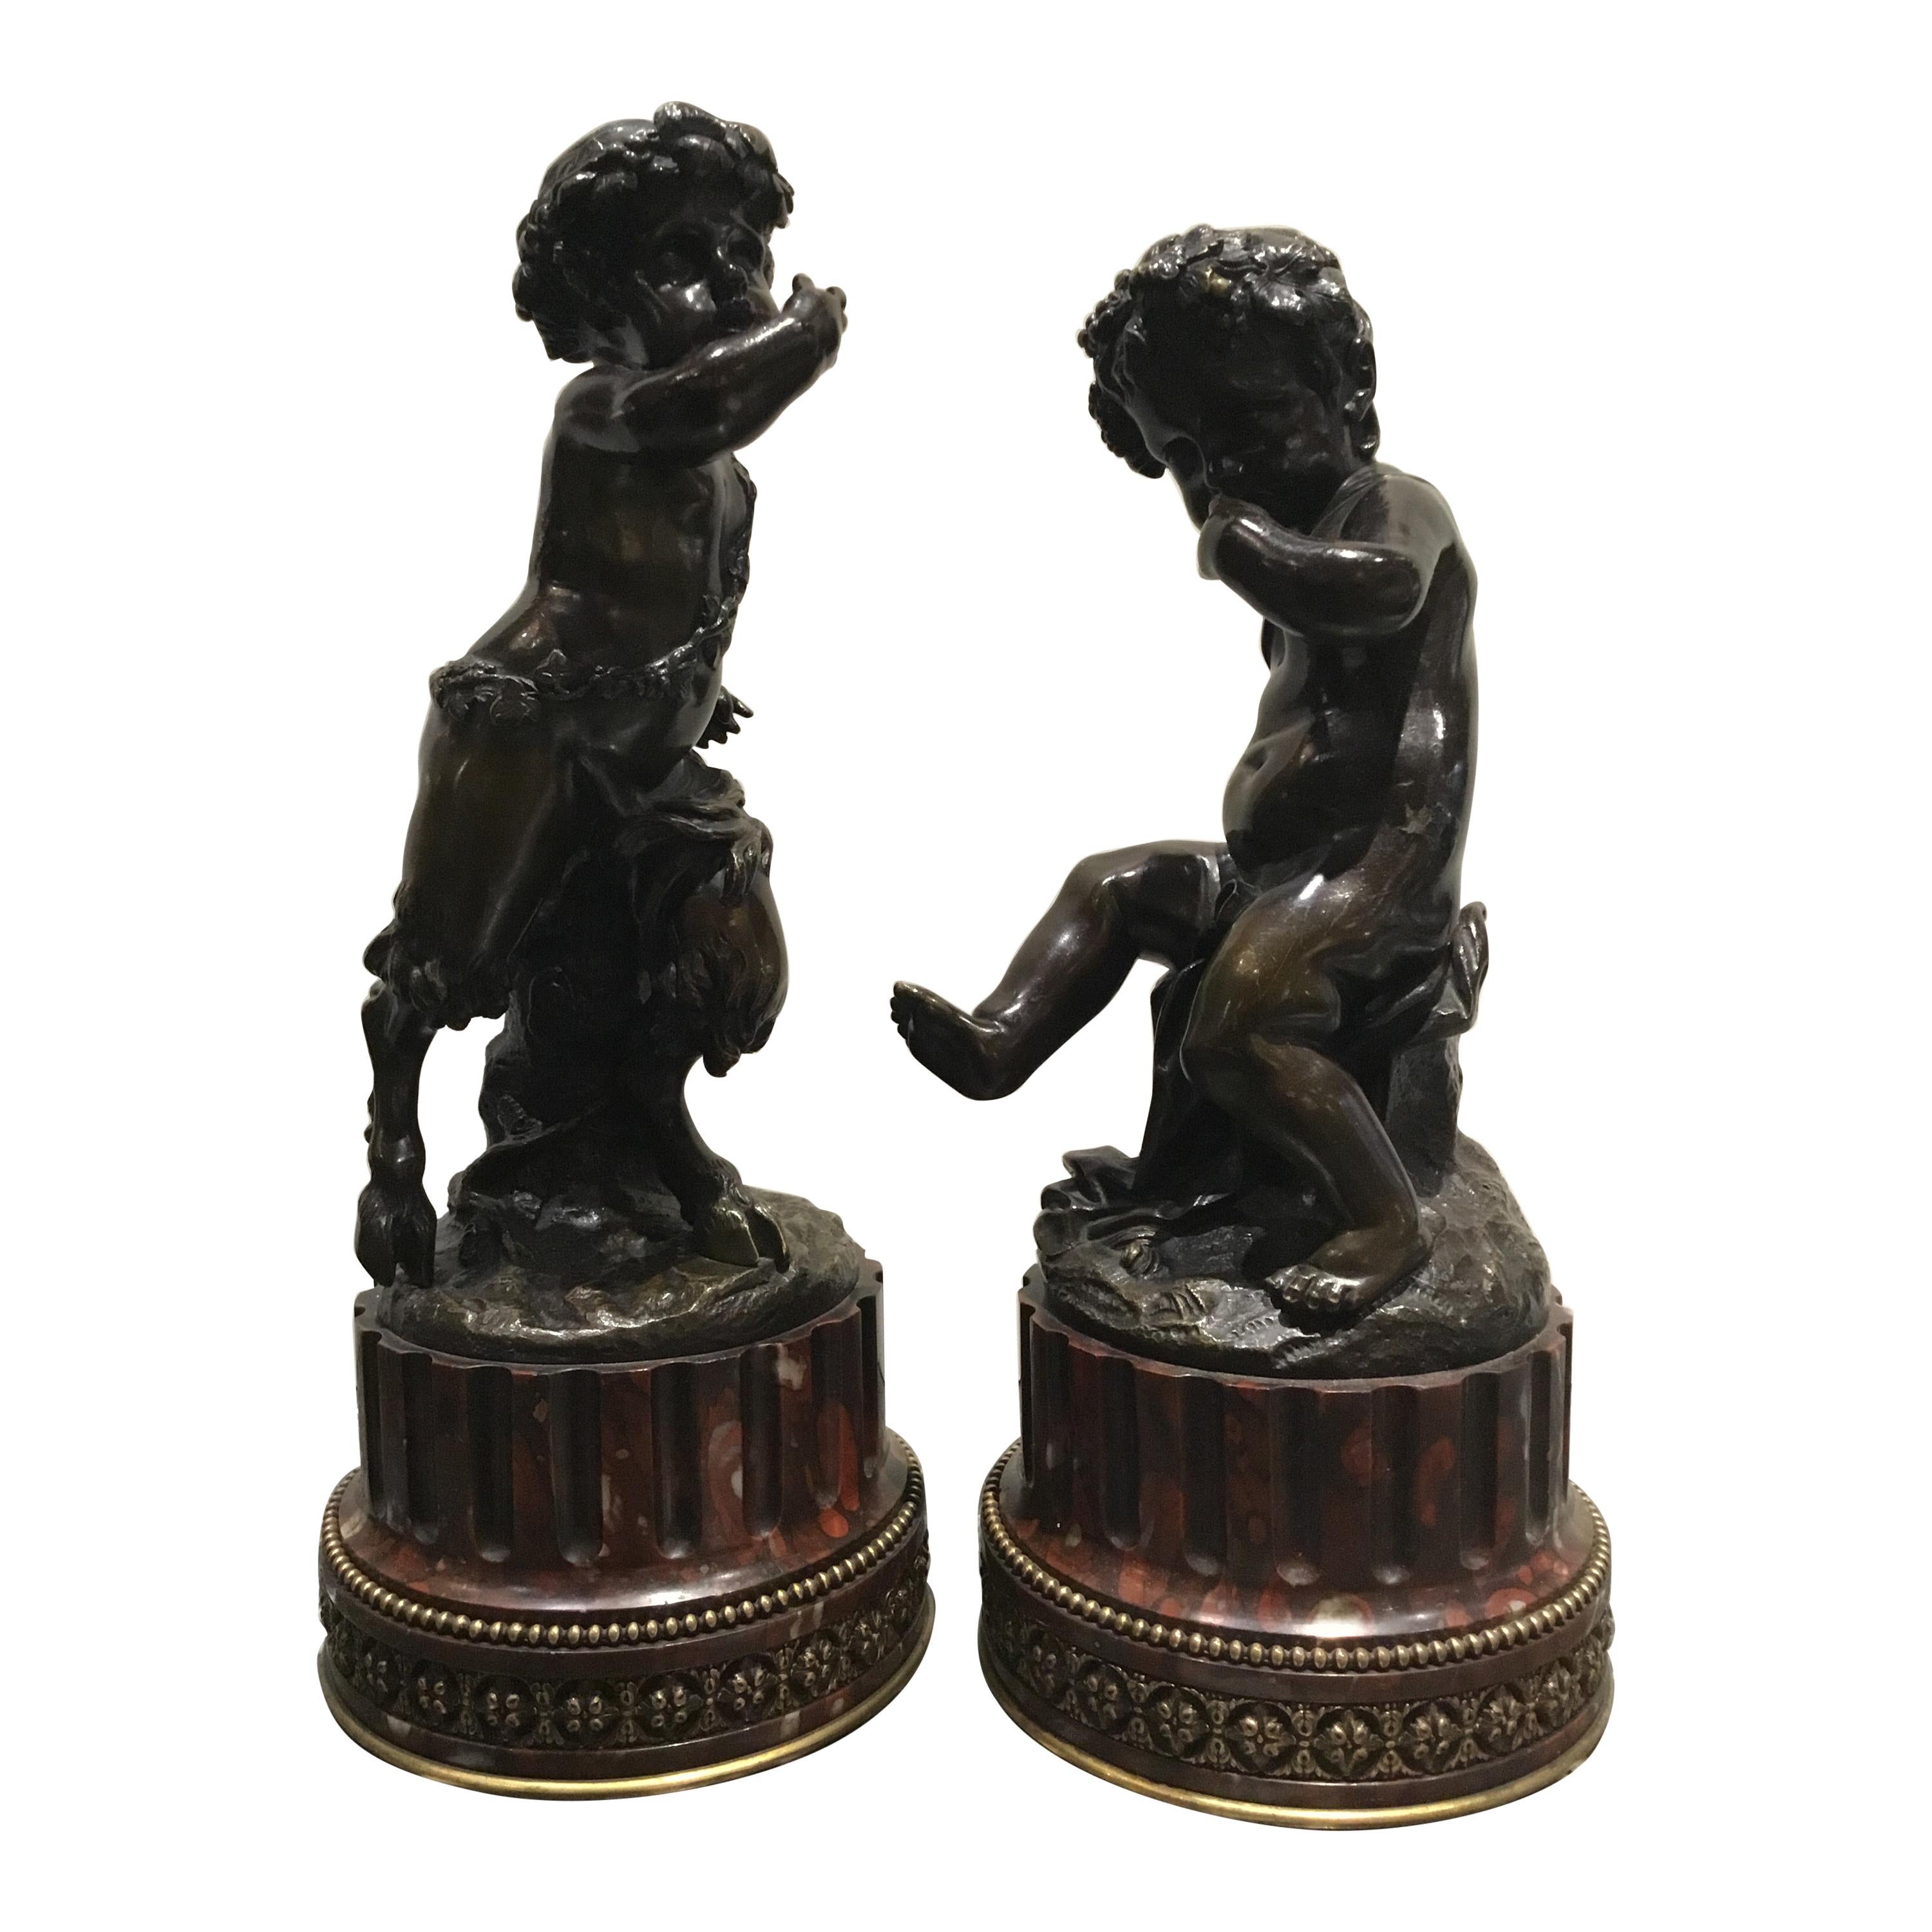 Pair of French Bronze Sculptures of a Nymph and Satyr Signed “Clodion” 